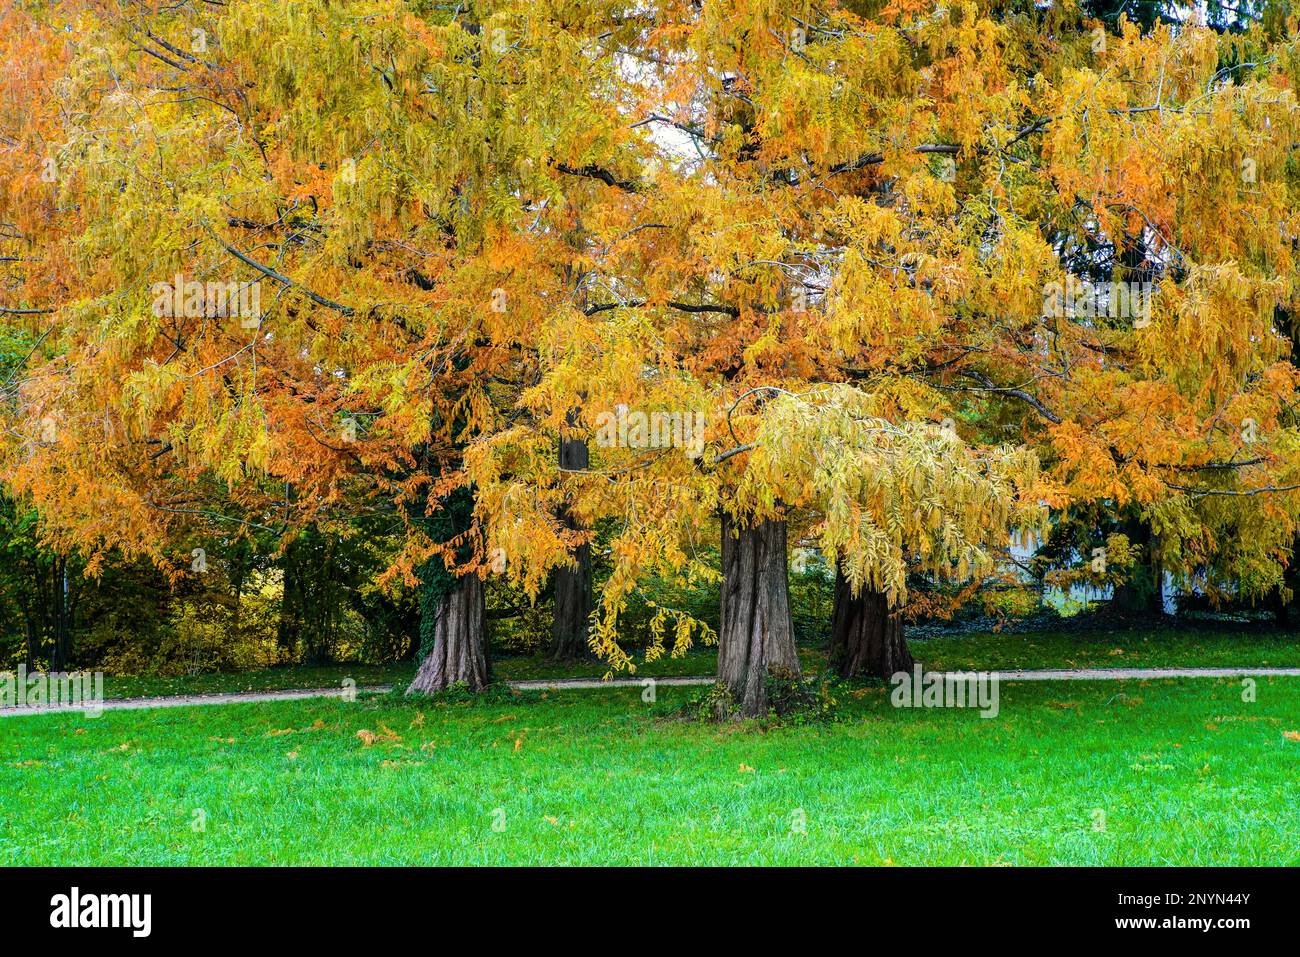 Fall Colours at Wenkenhof Park, Riehen, canton of Basel-Stadt, Switzerland. Stock Photo